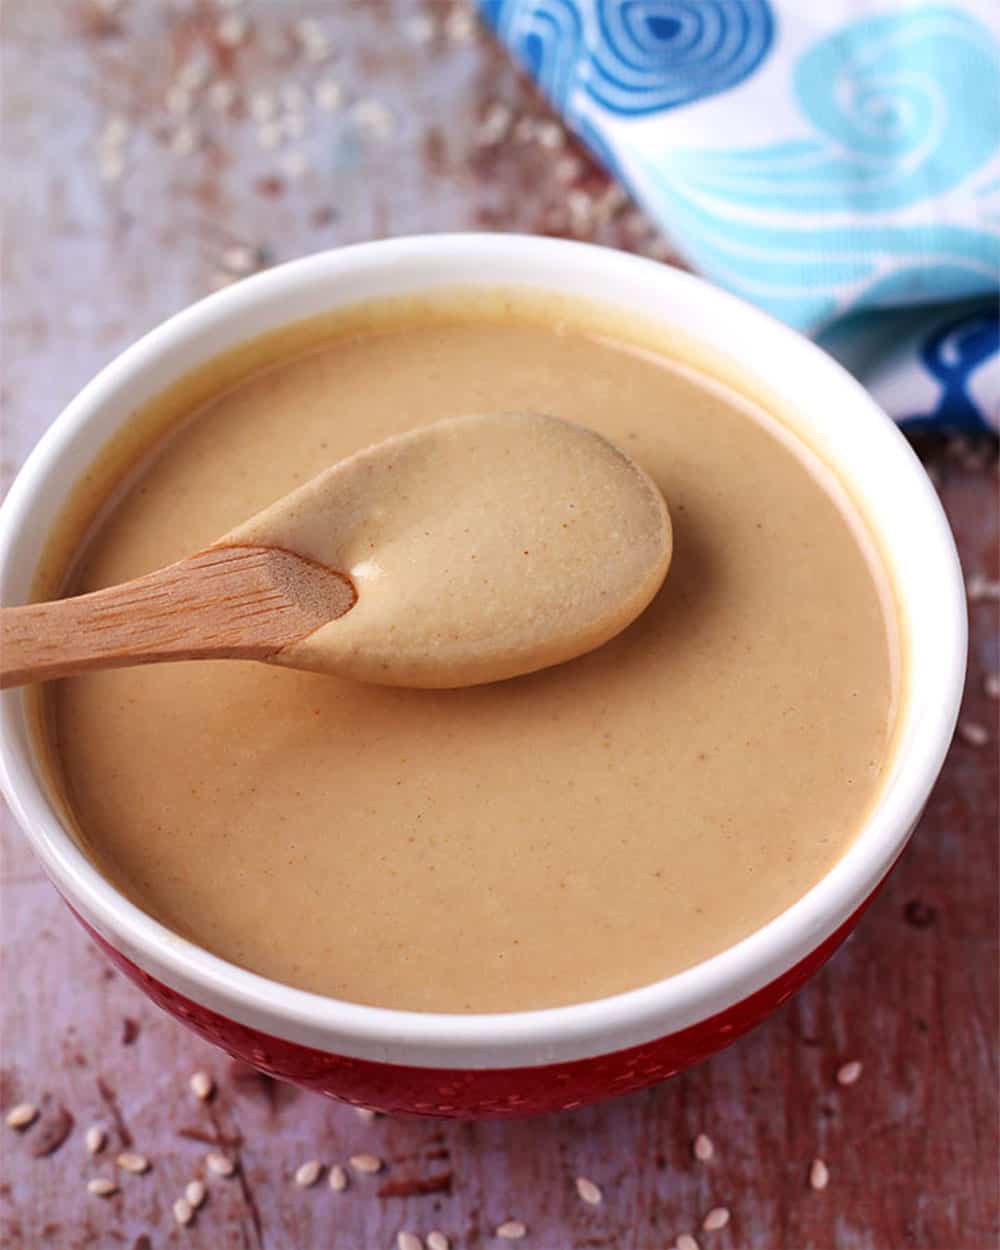 Creamy tahini in a small red bowl with a white brim and a little wooden spoon in it.